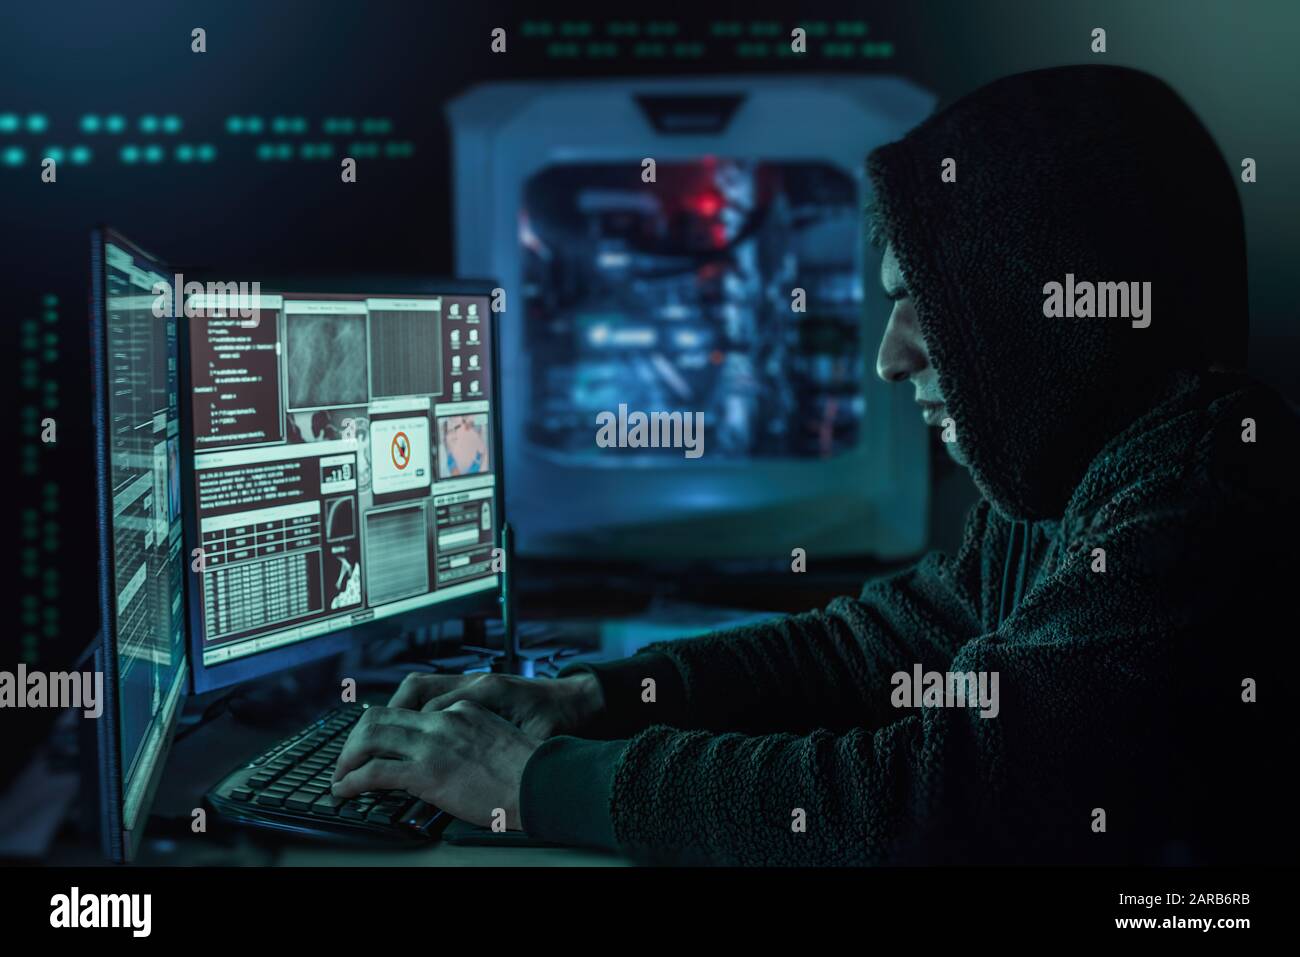 Dangerous hooded hacker in his hideout place which has a dark atmosphere, multiple displays Stock Photo